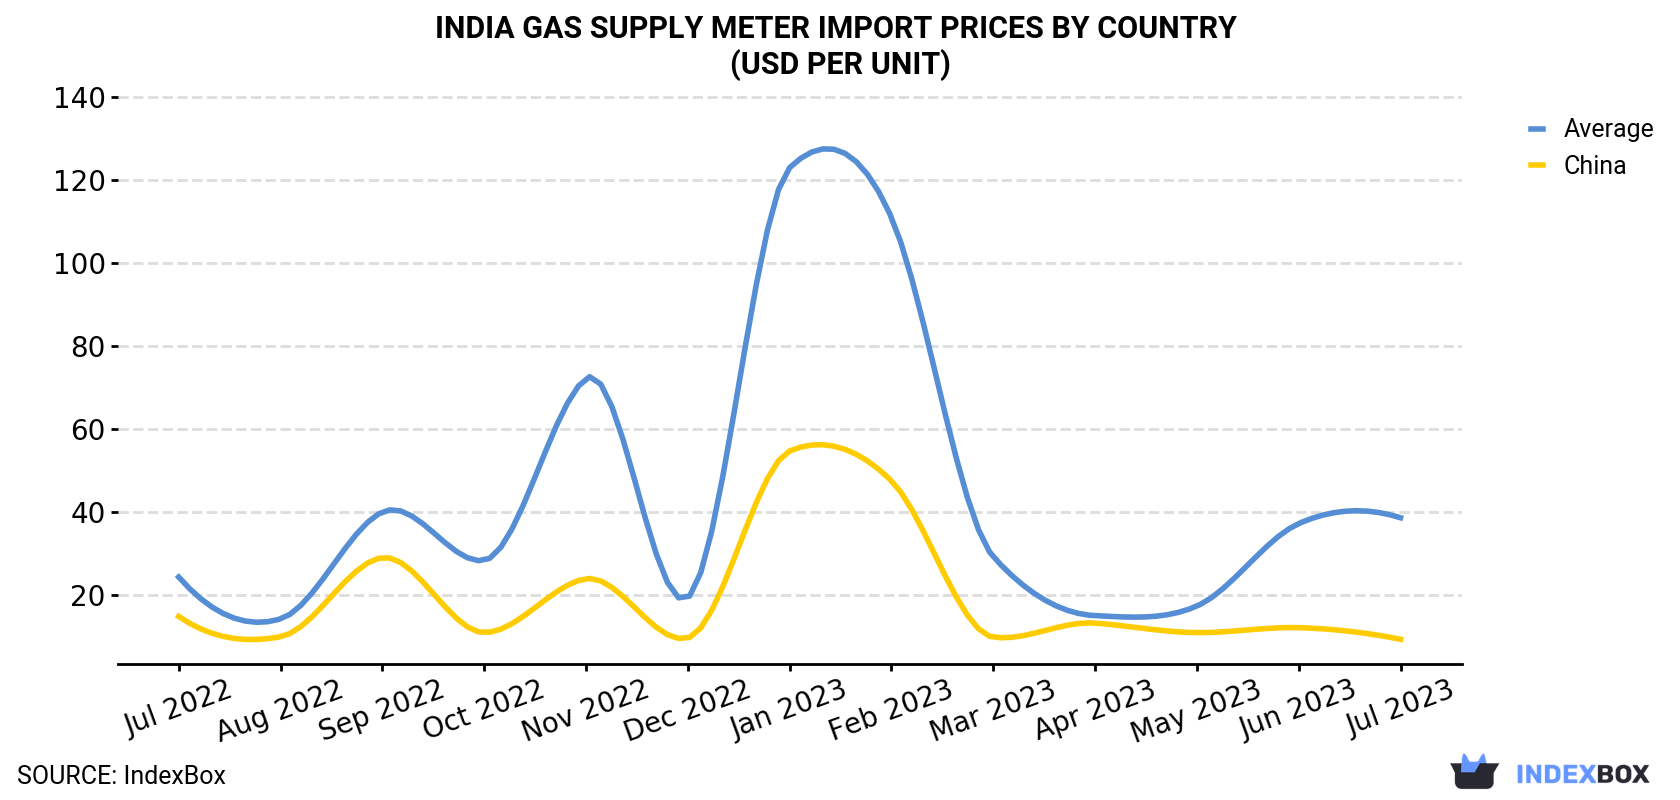 India Gas Supply Meter Import Prices By Country (USD Per Unit)